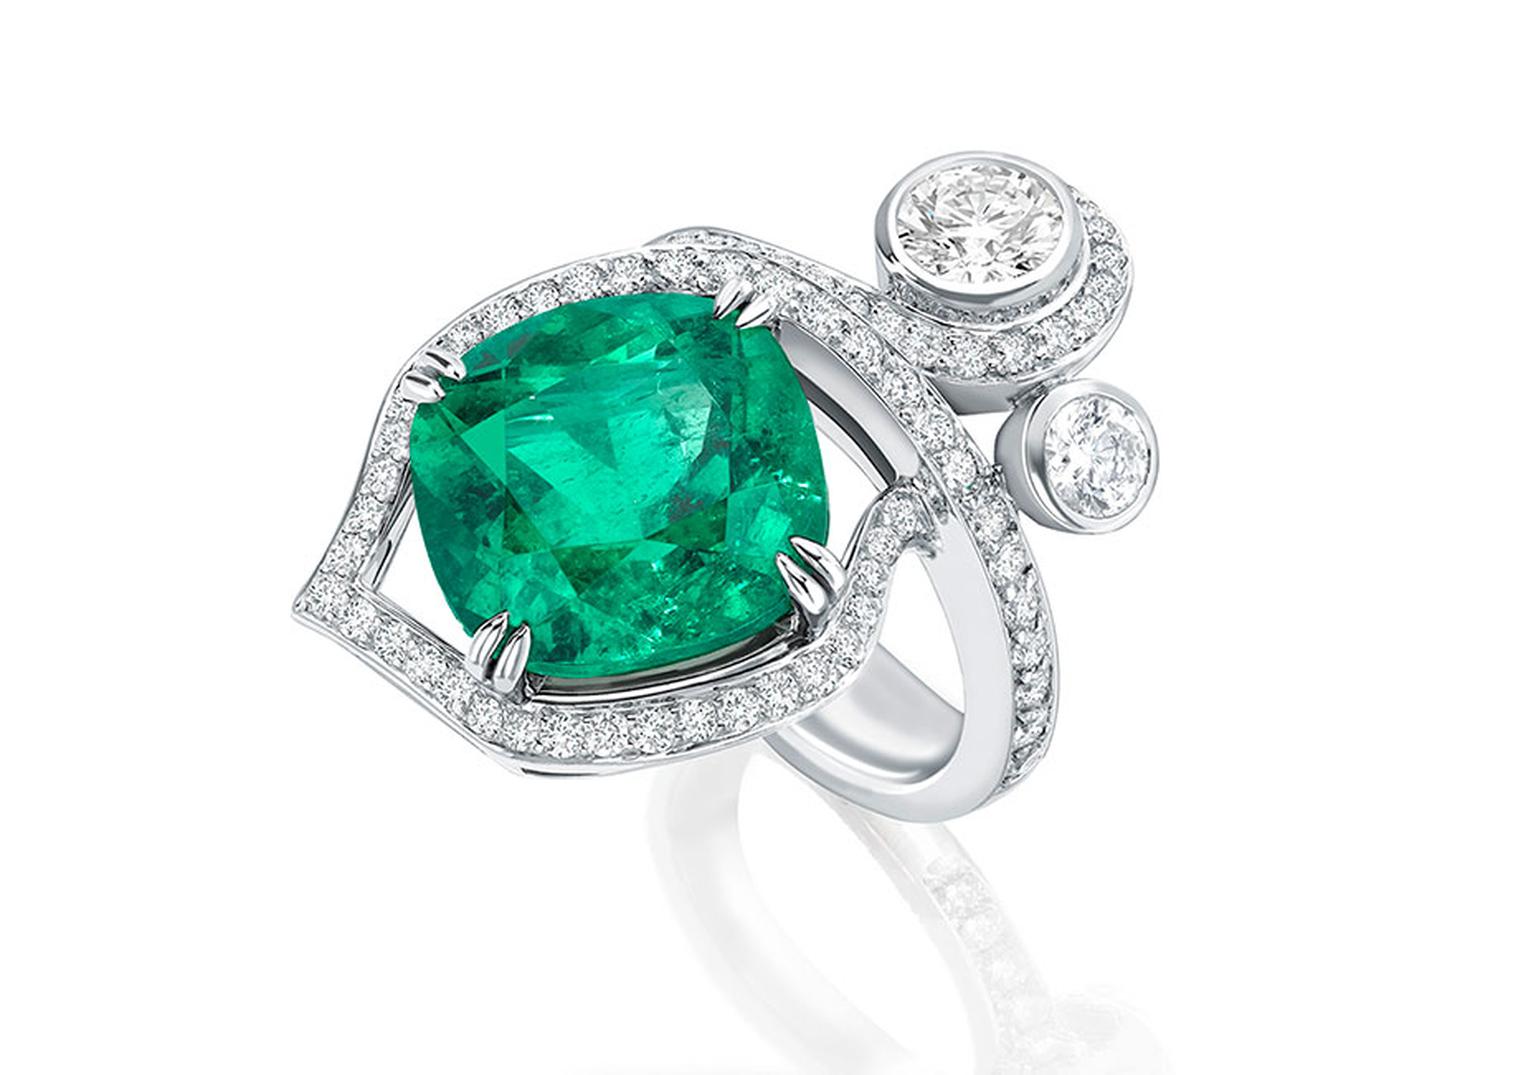 Boodles' Greenfire emerald ring, part of the Greenfire suite, features a single emerald surrounded by pavé diamonds and two brilliant-cut diamonds designed to appear as entwined forest foliage